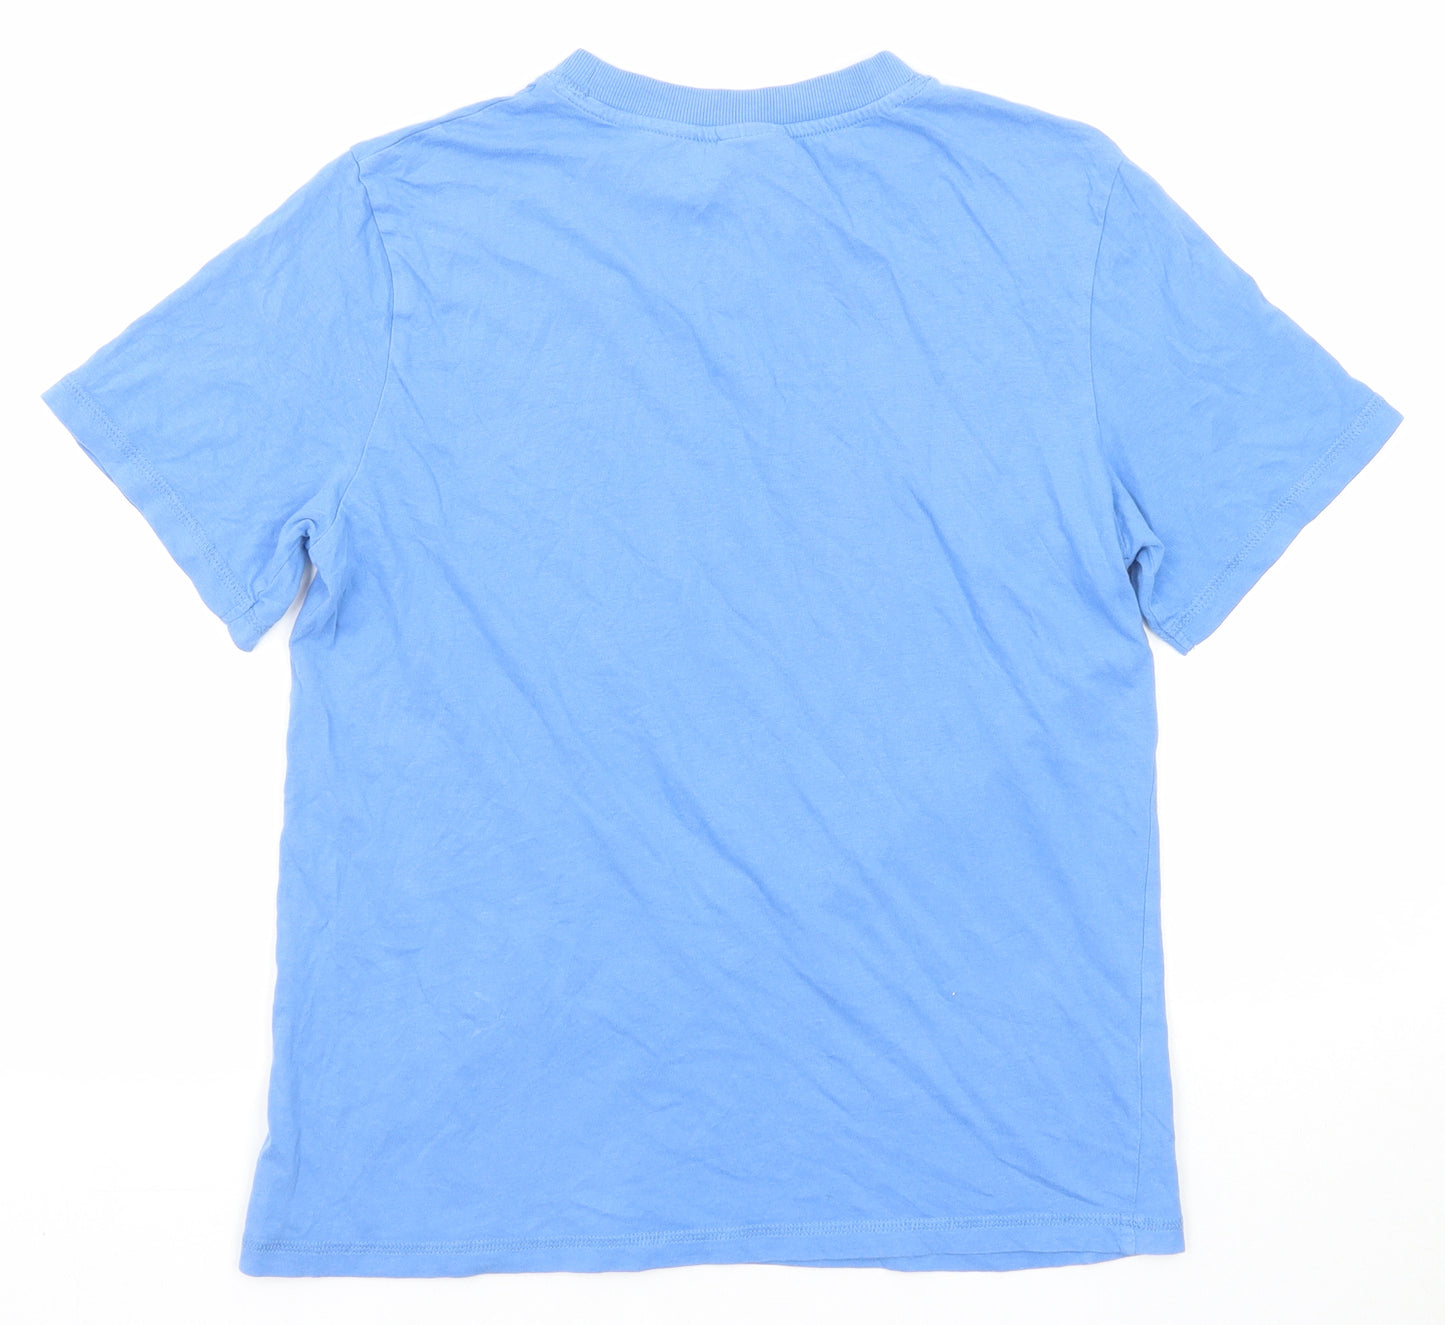 H&M Boys Blue Cotton Basic T-Shirt Size 13-14 Years Round Neck Pullover - New York City